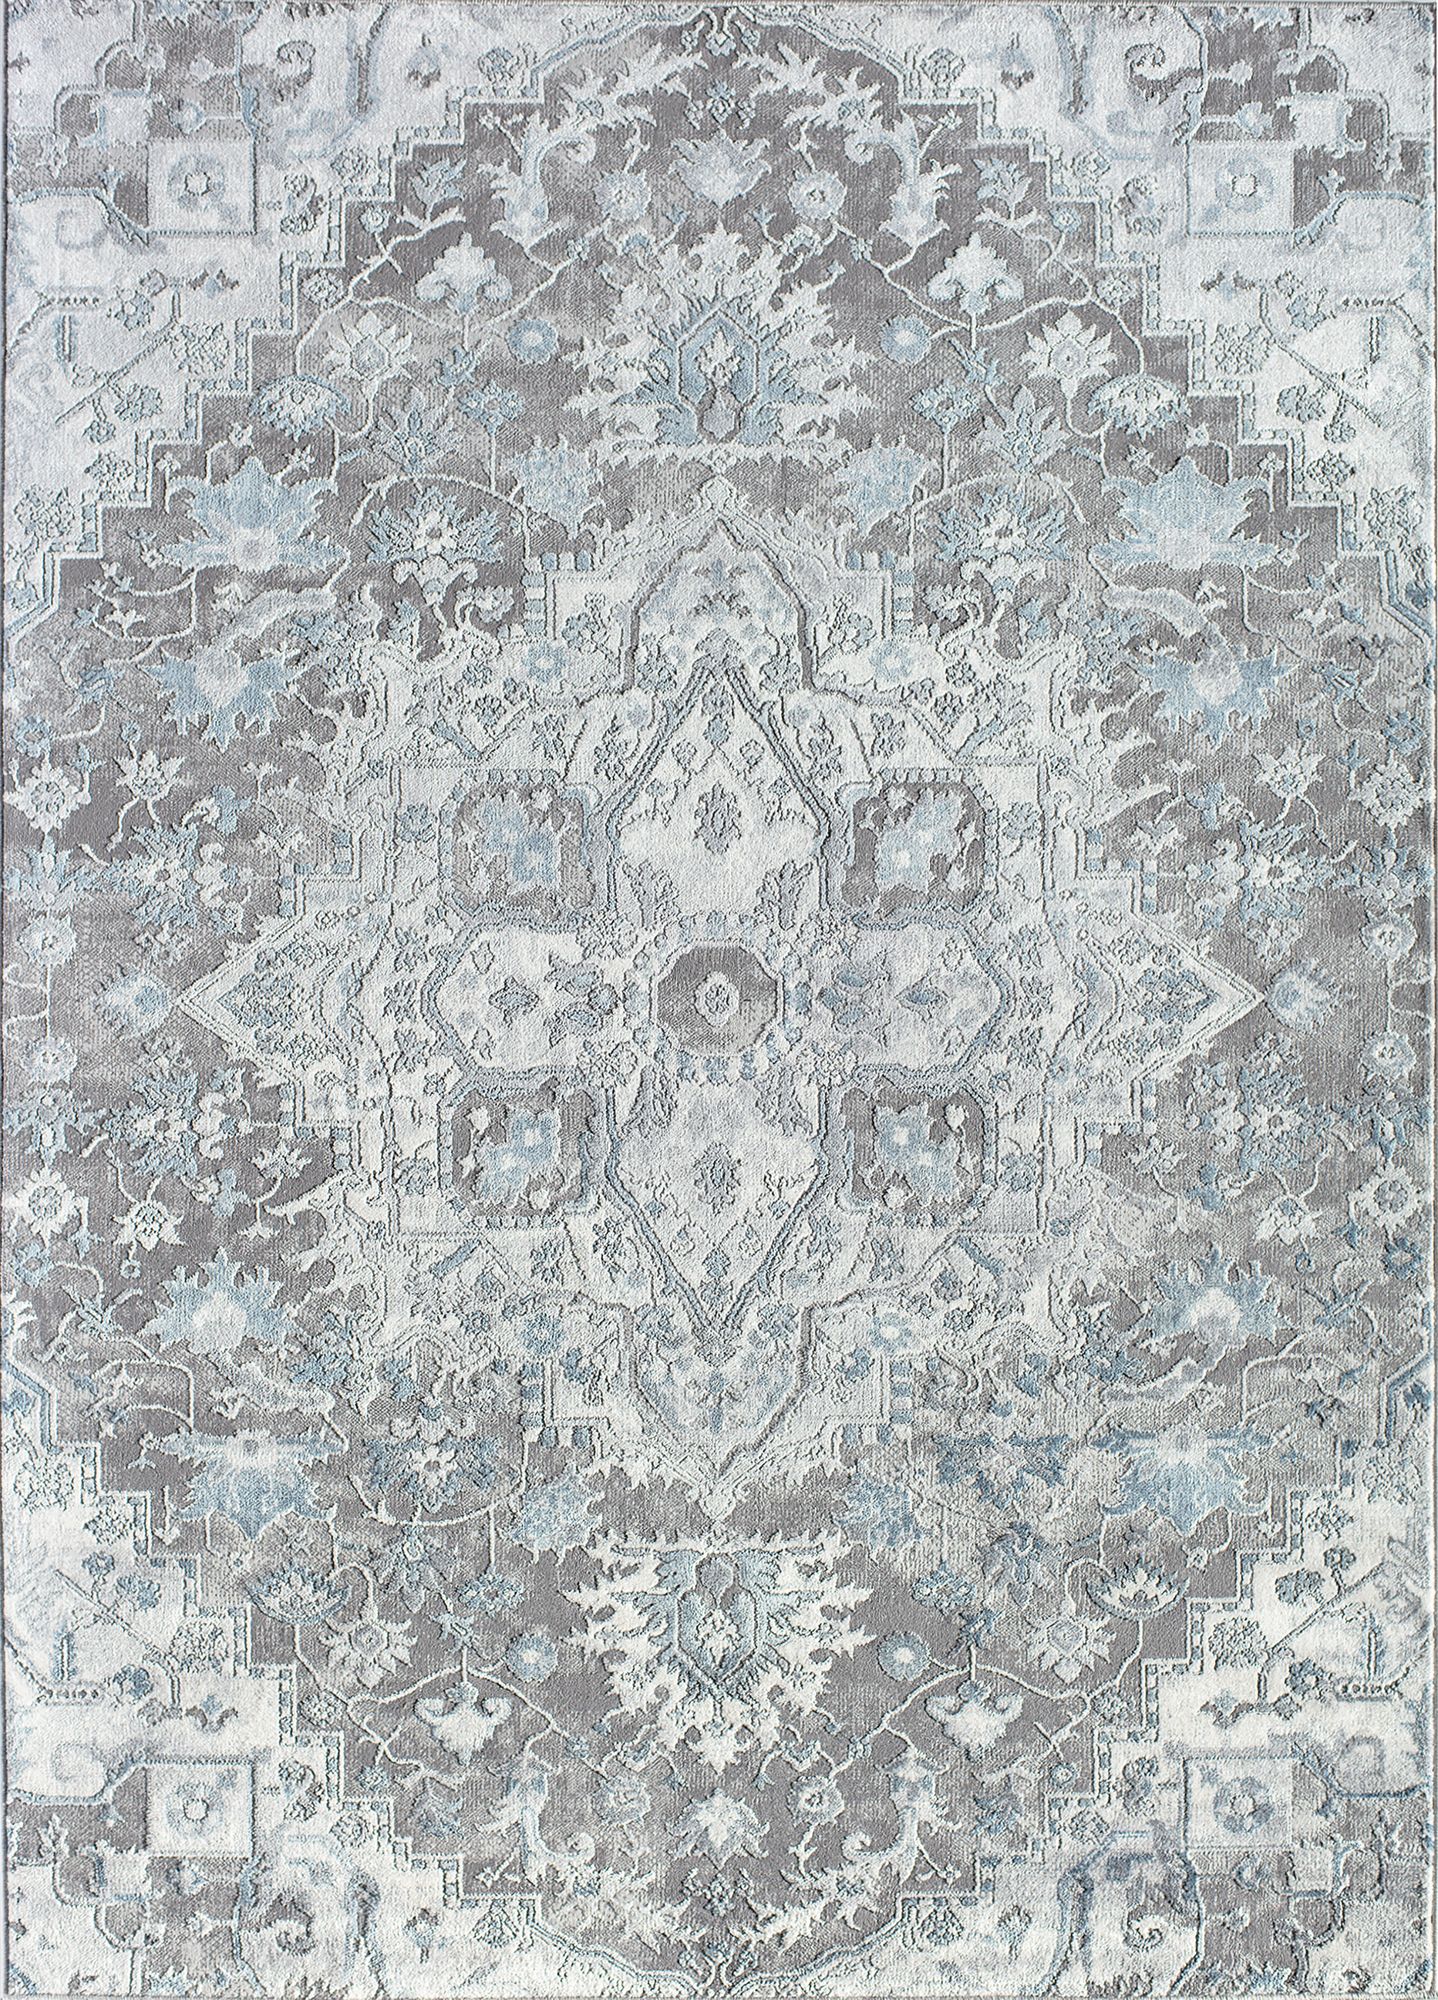 Detailed oriental rug with intricate patterns in various colors, displayed flat to showcase the full design.